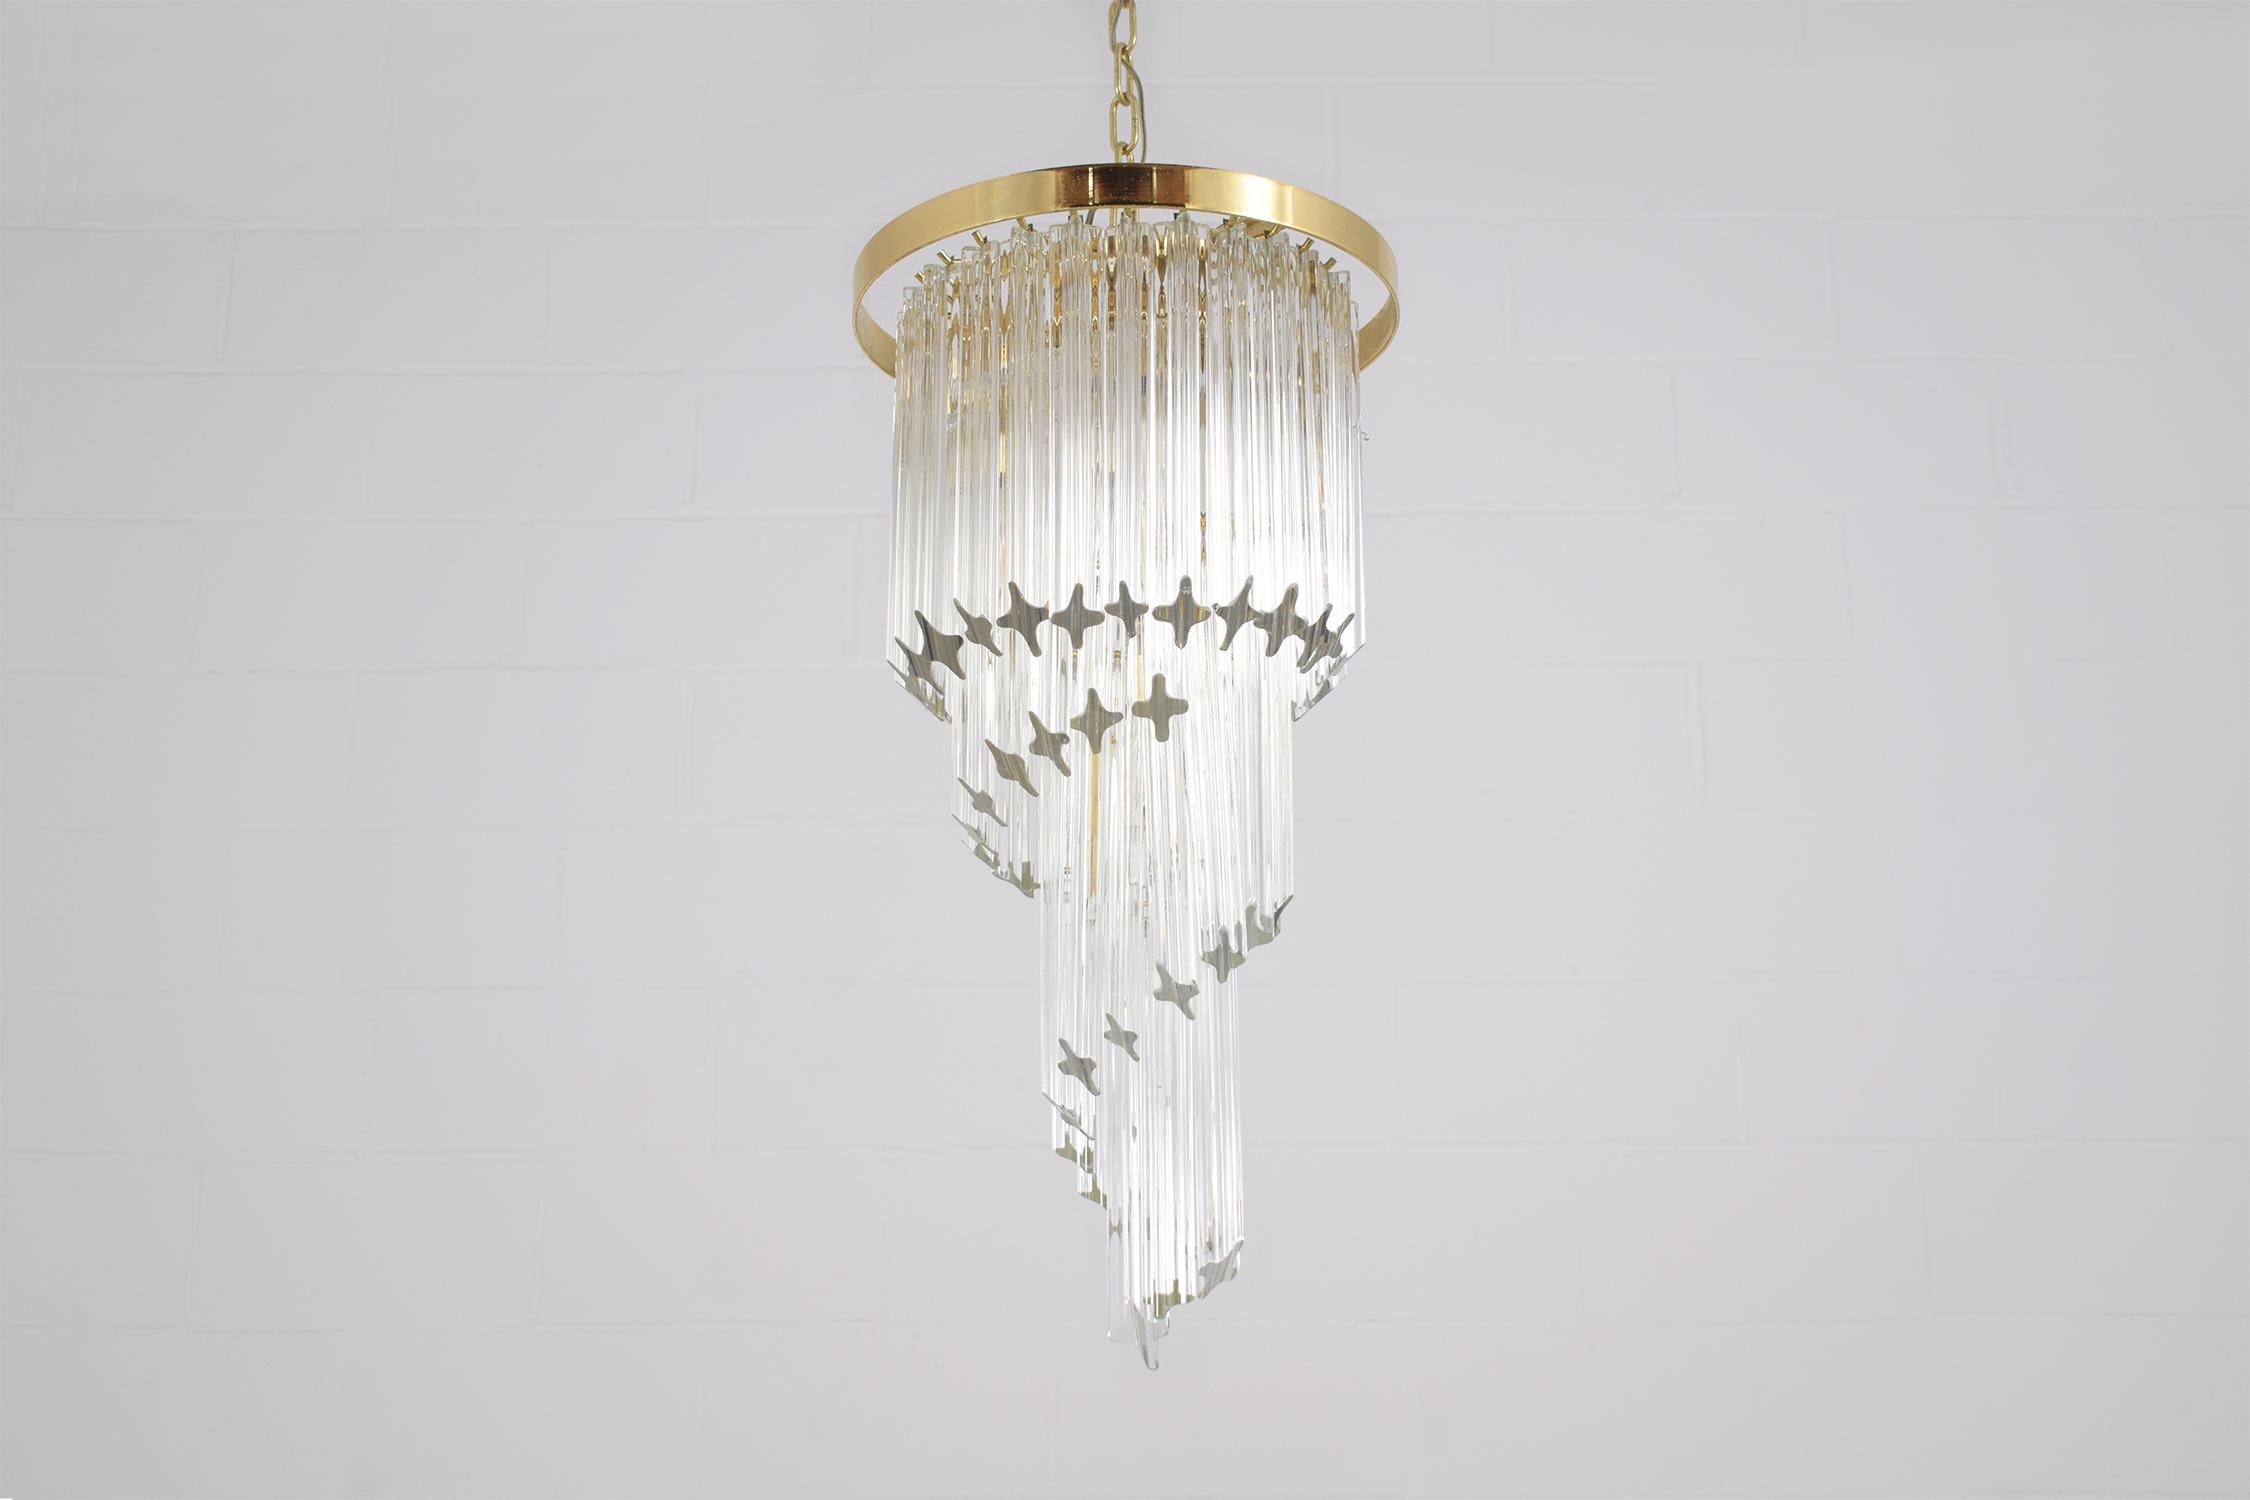 Add a touch of timeless elegance to your space with our vintage drop pendant chandelier, expertly restored to its former glory by our in-house team of skilled craftsmen. This exquisite light fixture is in great condition, showcasing the